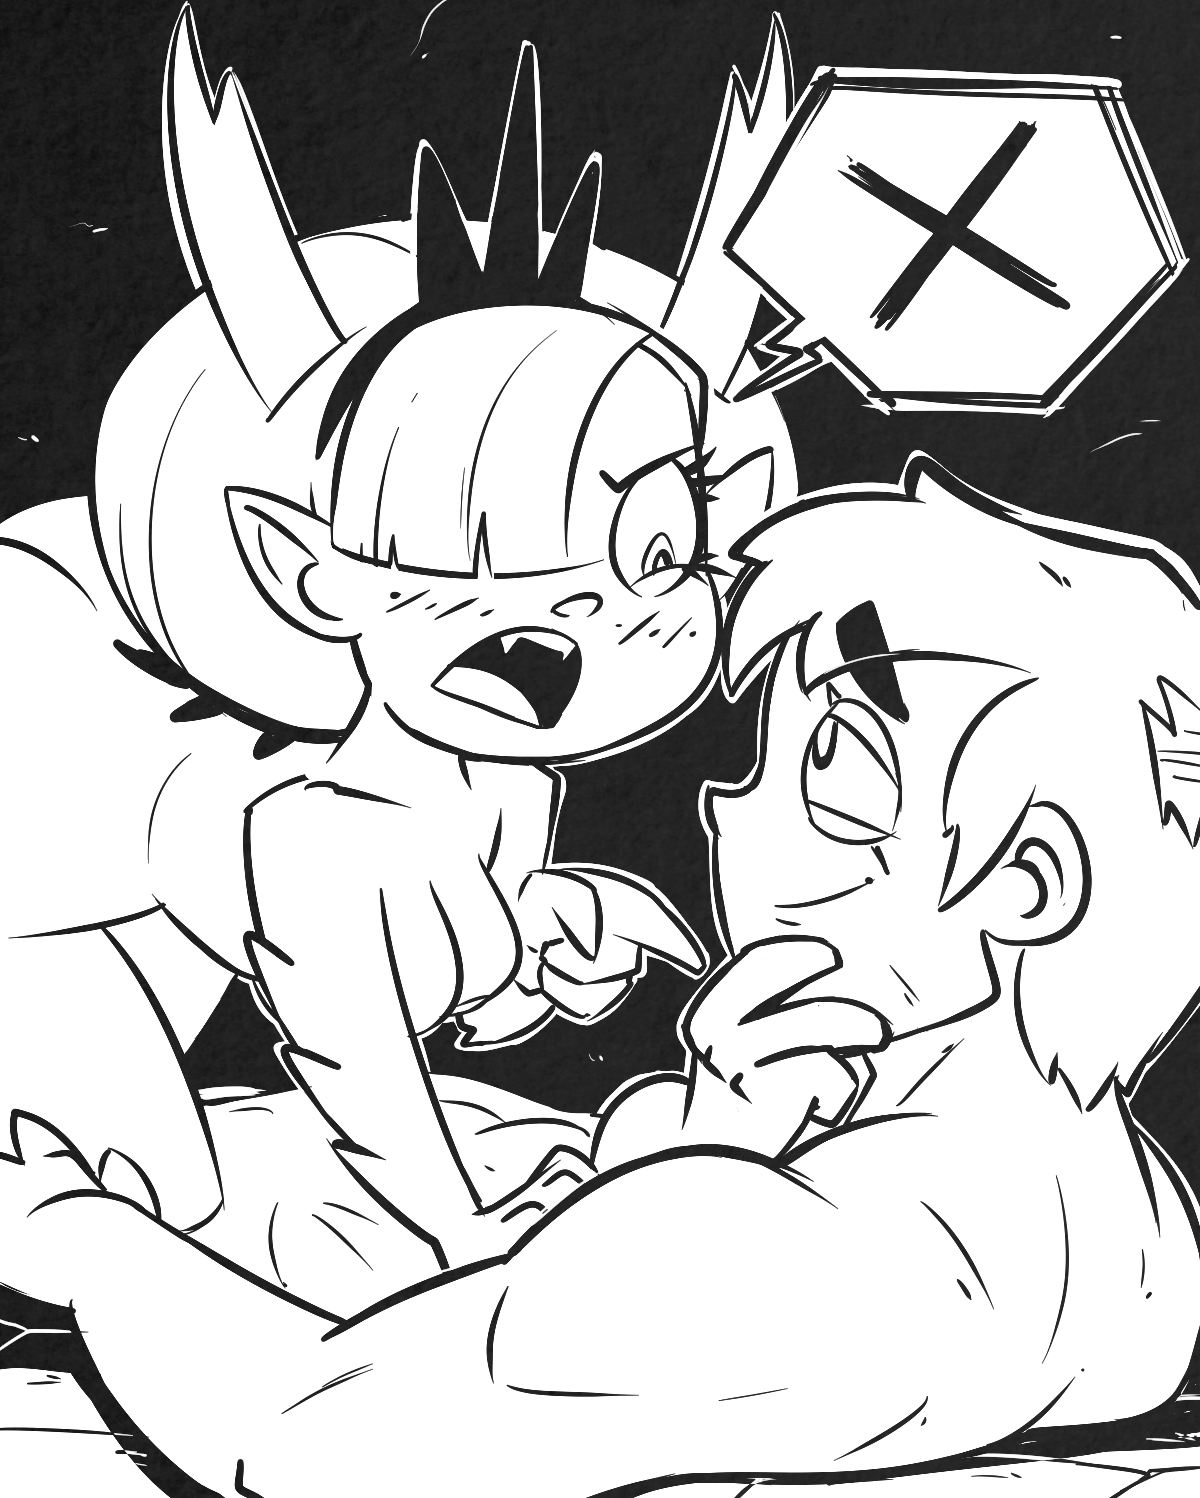 Hekapoo – Star Vs The Forces of Evil - 31